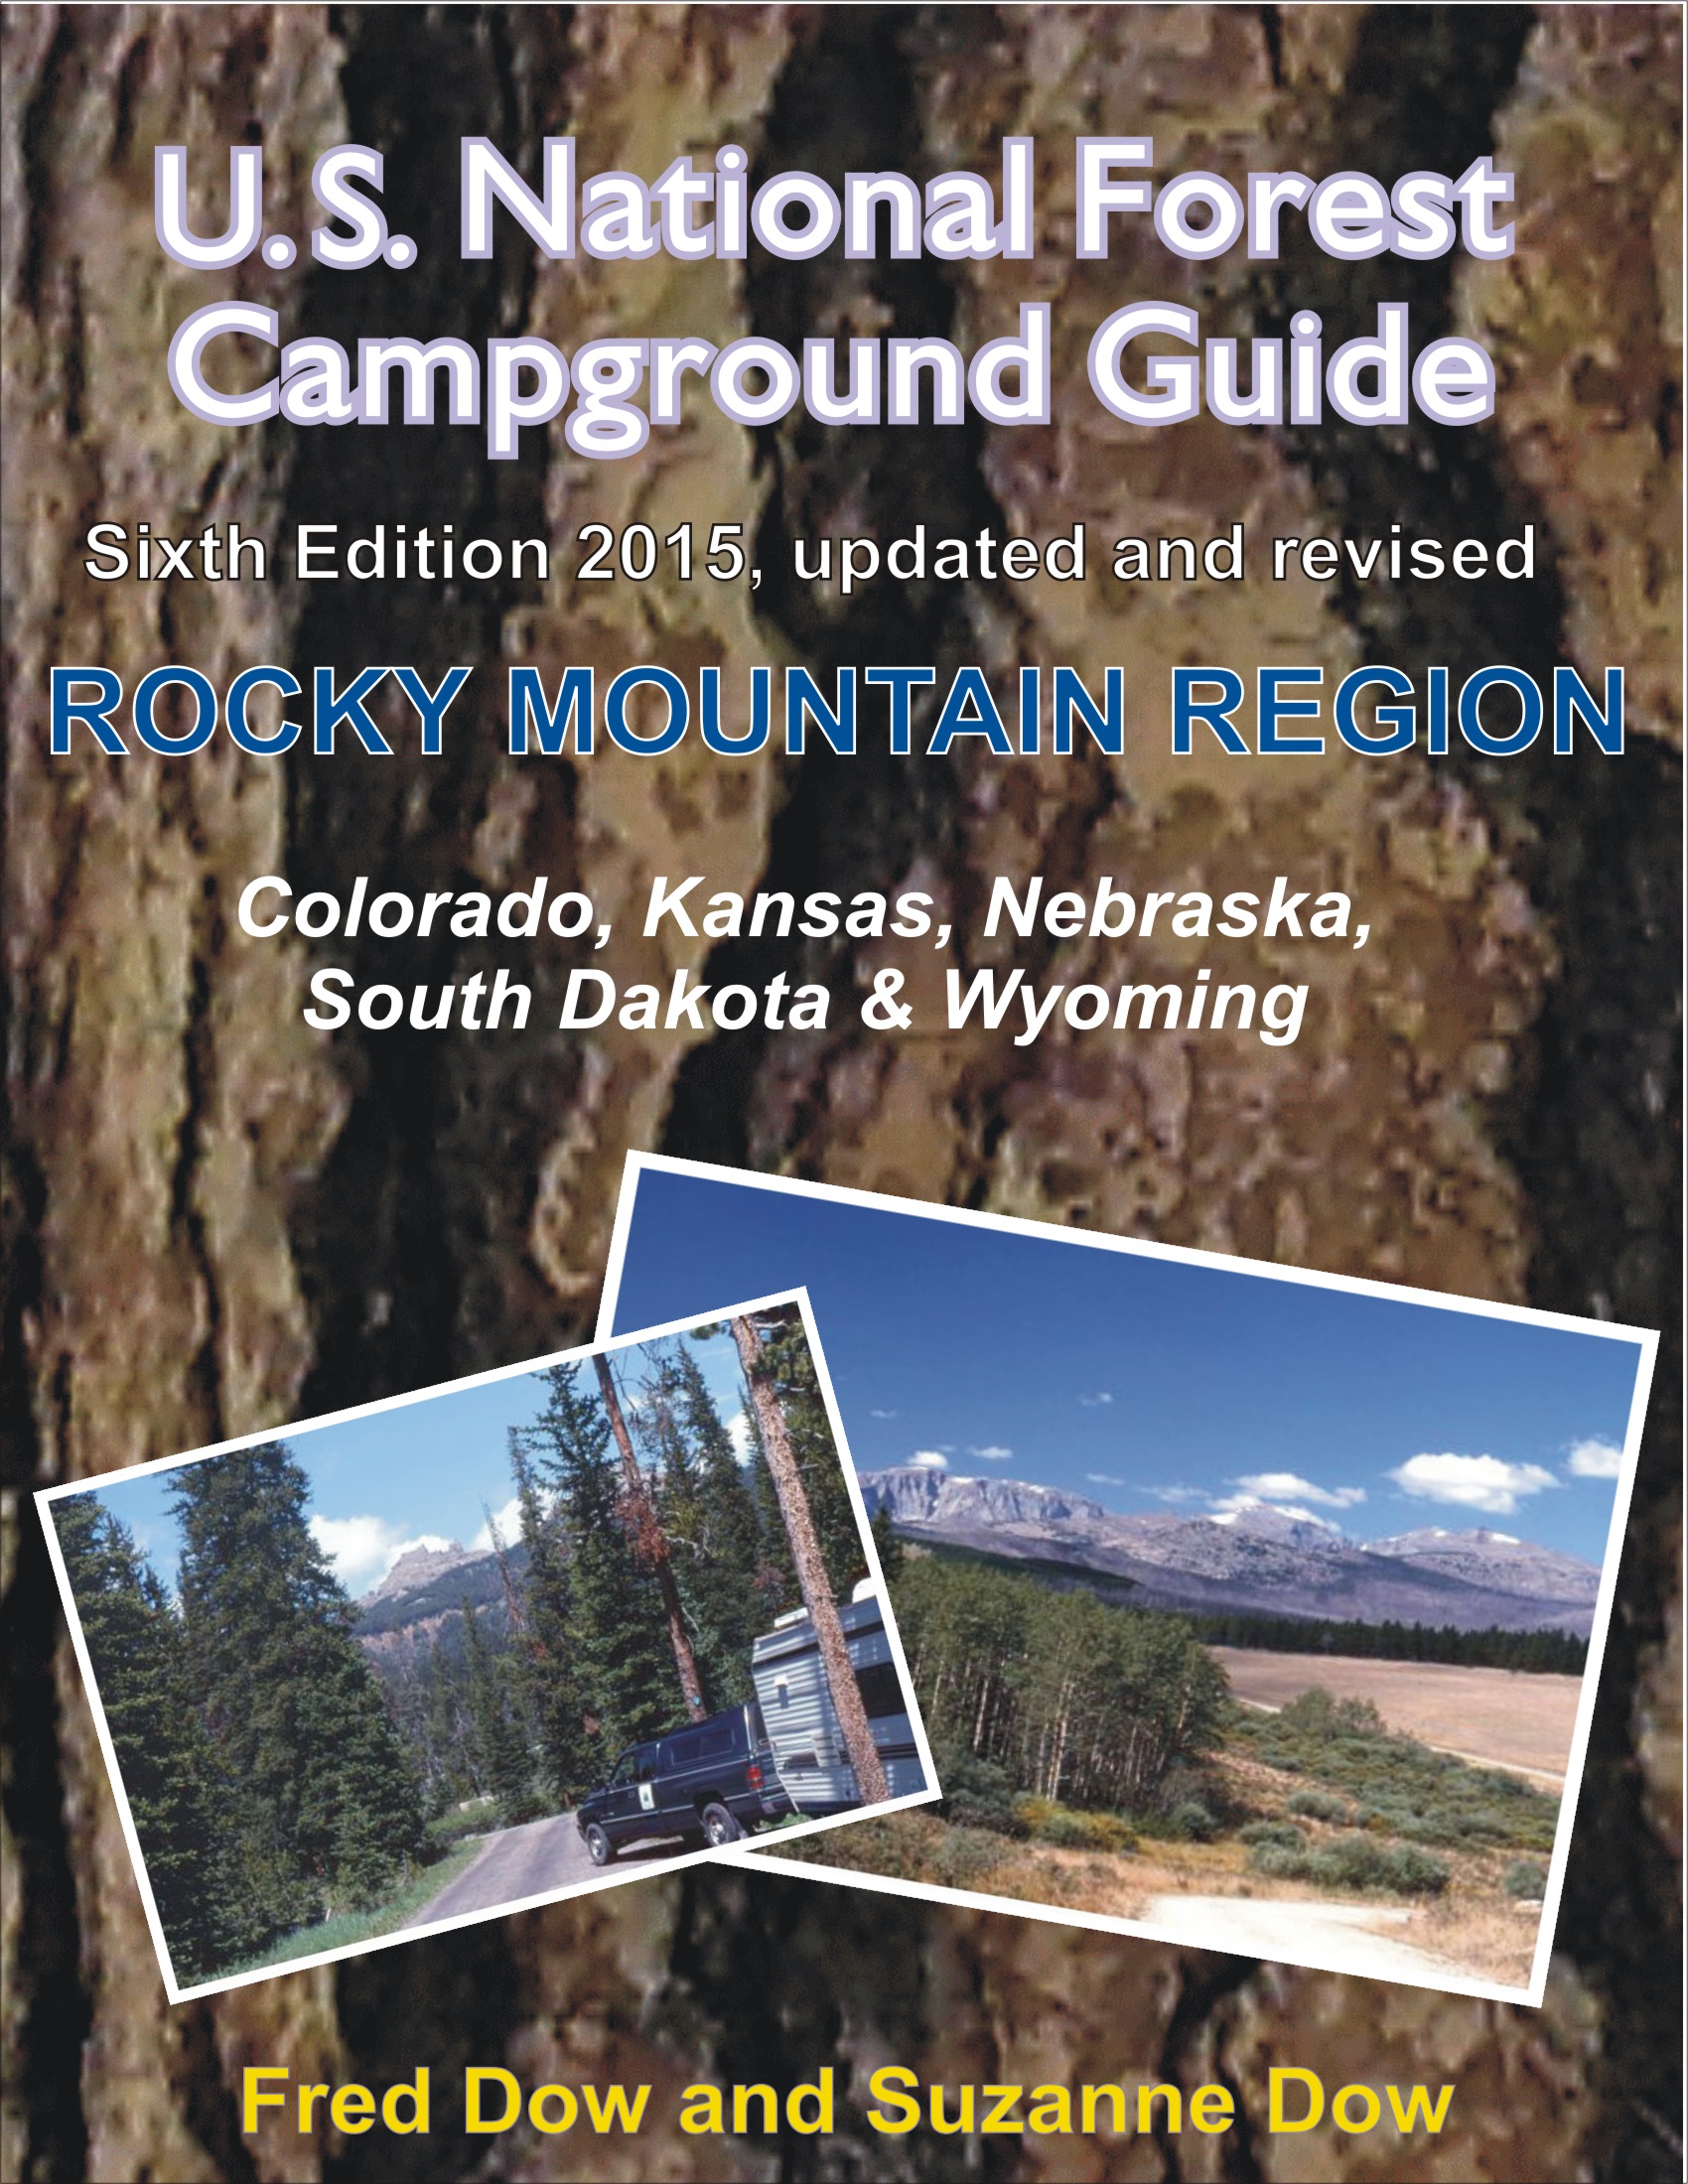 U.S. National Forest Campground Guide - Rocky Mountain Region